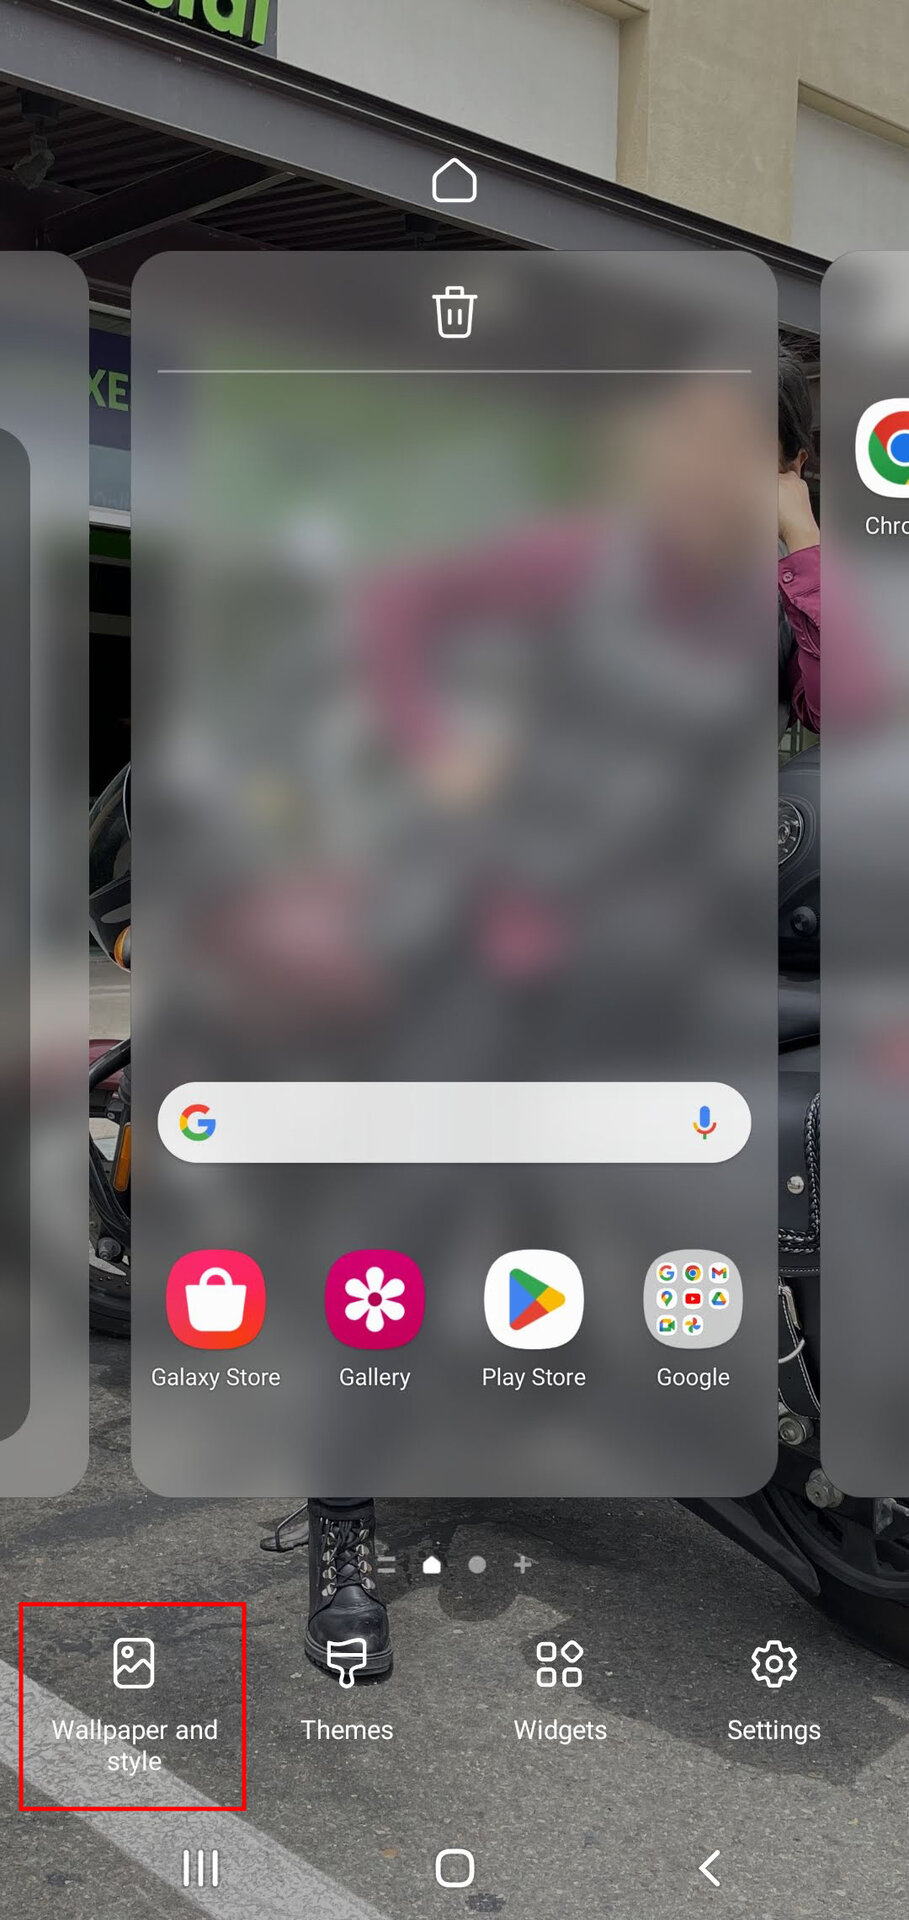 How to set wallpaper on Samsung Galaxy S10 Plus 1